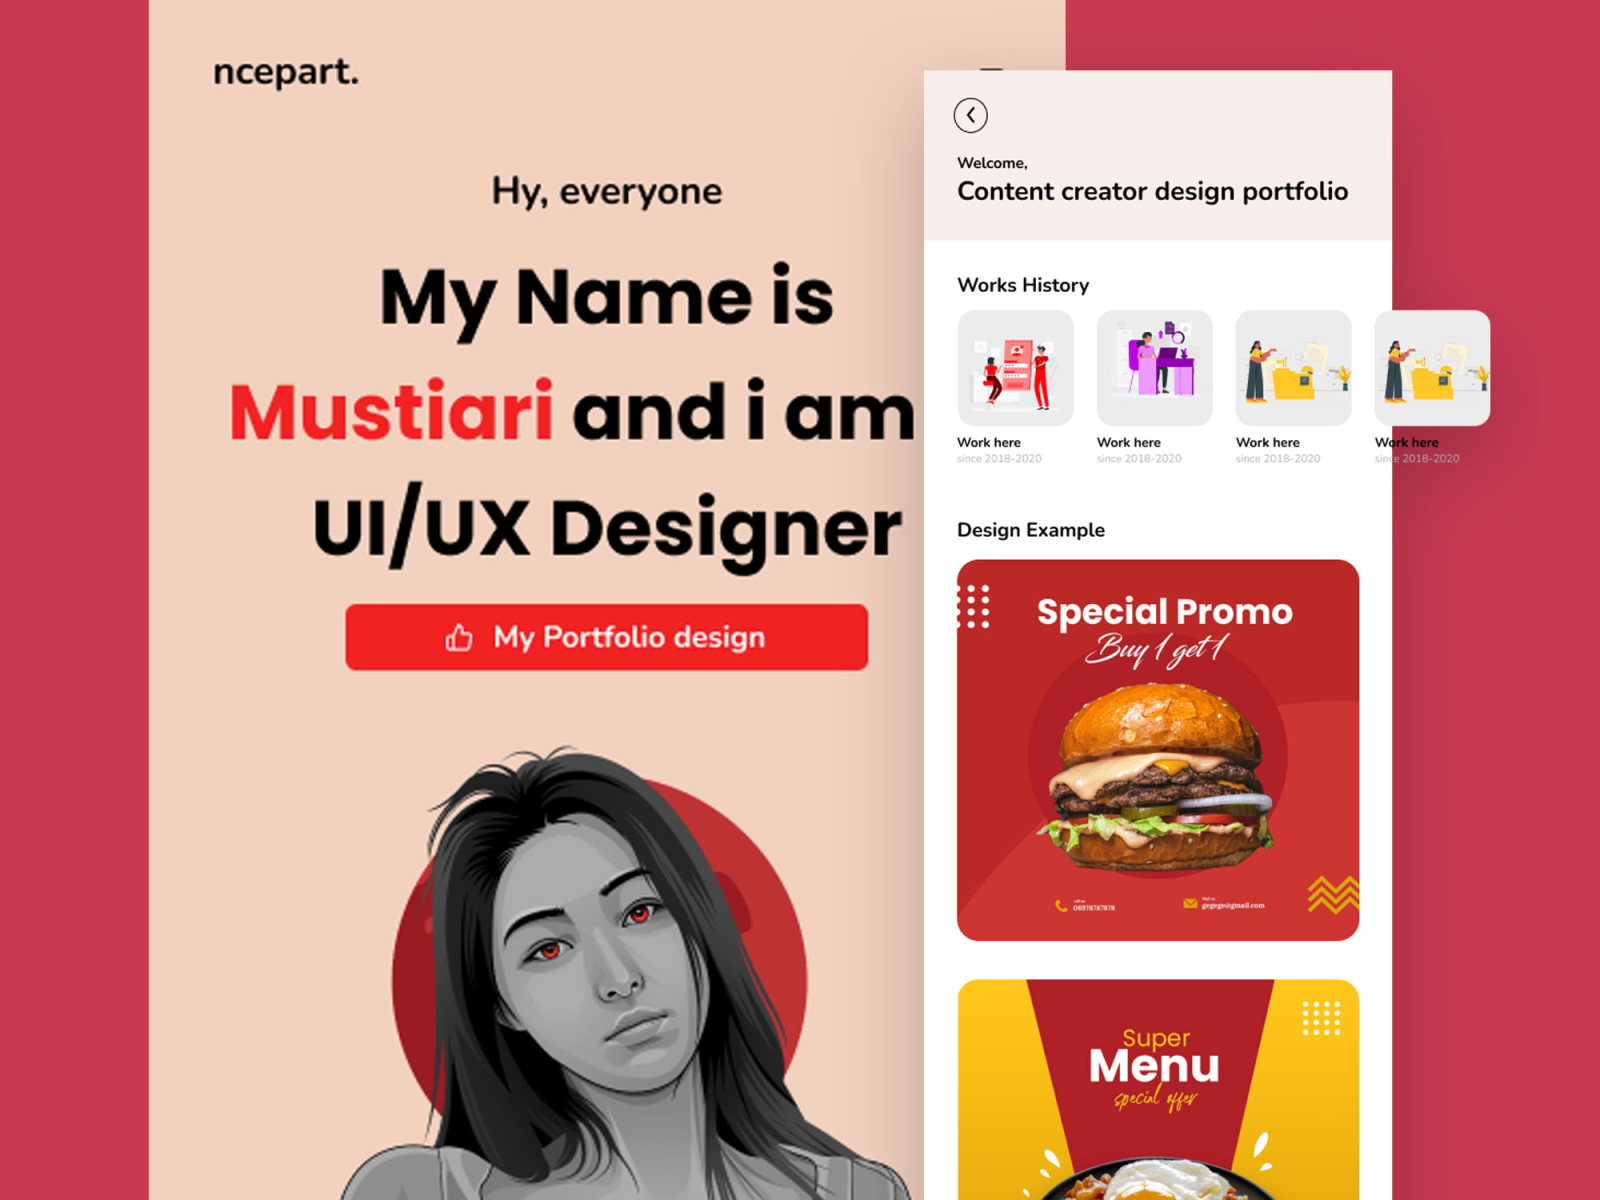 Mobile apps for portfolio by Mustiari on Dribbble